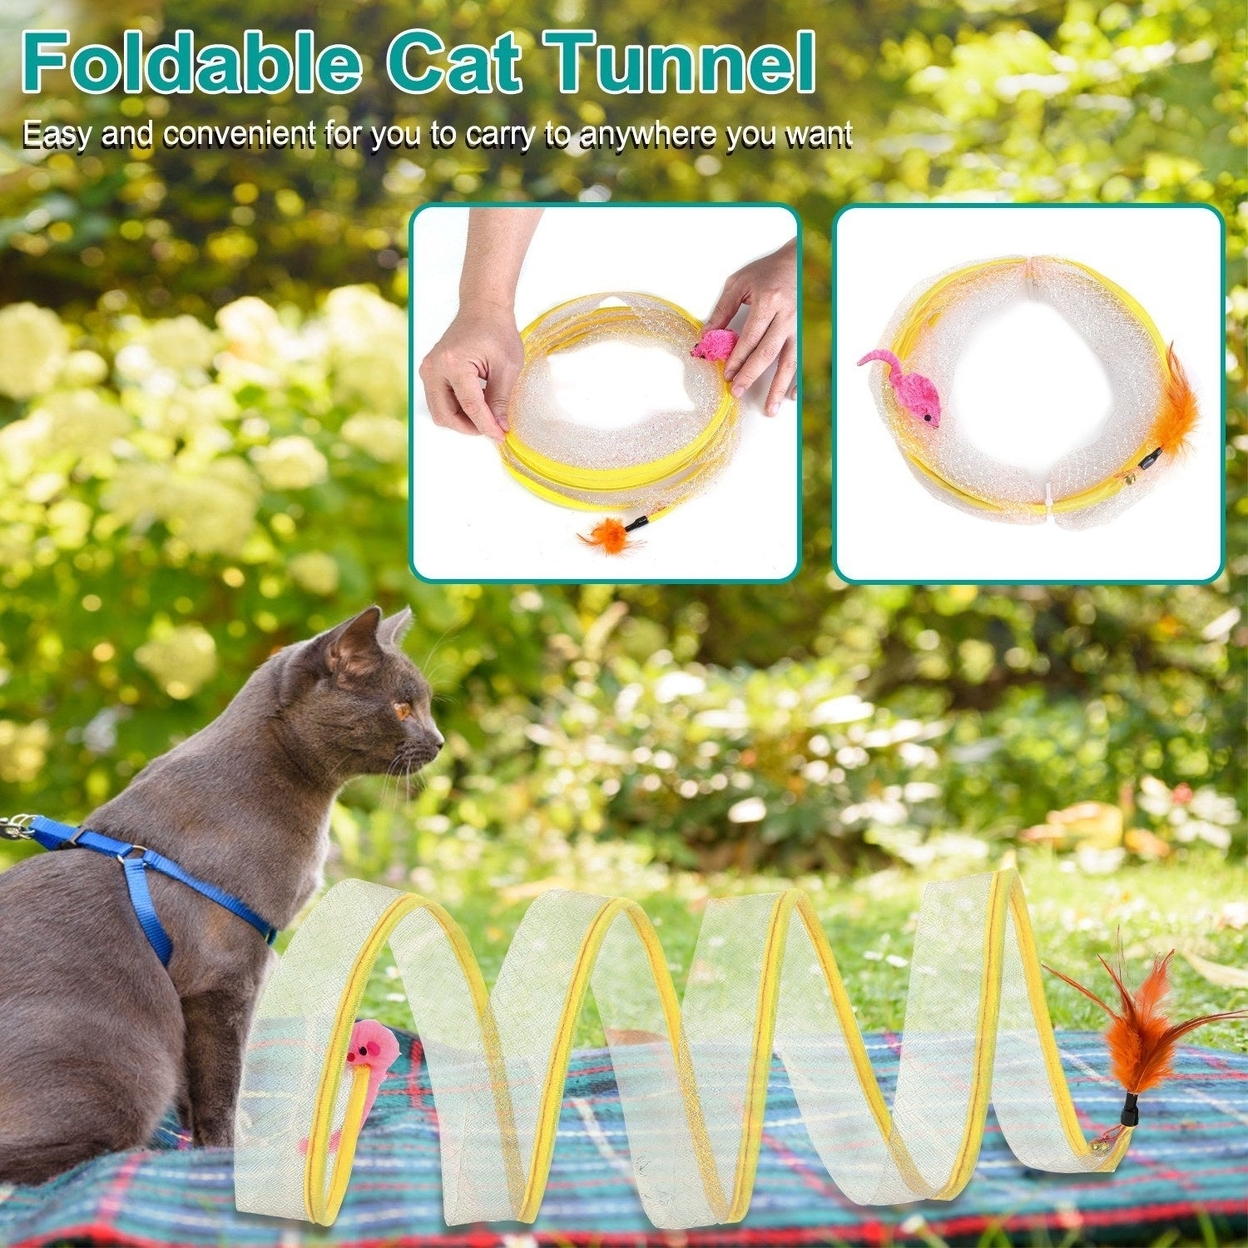 Dsermall 2Pcs Foldable Cat Tunnel with Bell Feather Mouse Toys Collapsible Indoor Cat Spring Tube with Interactive Toy for Kittens Cats